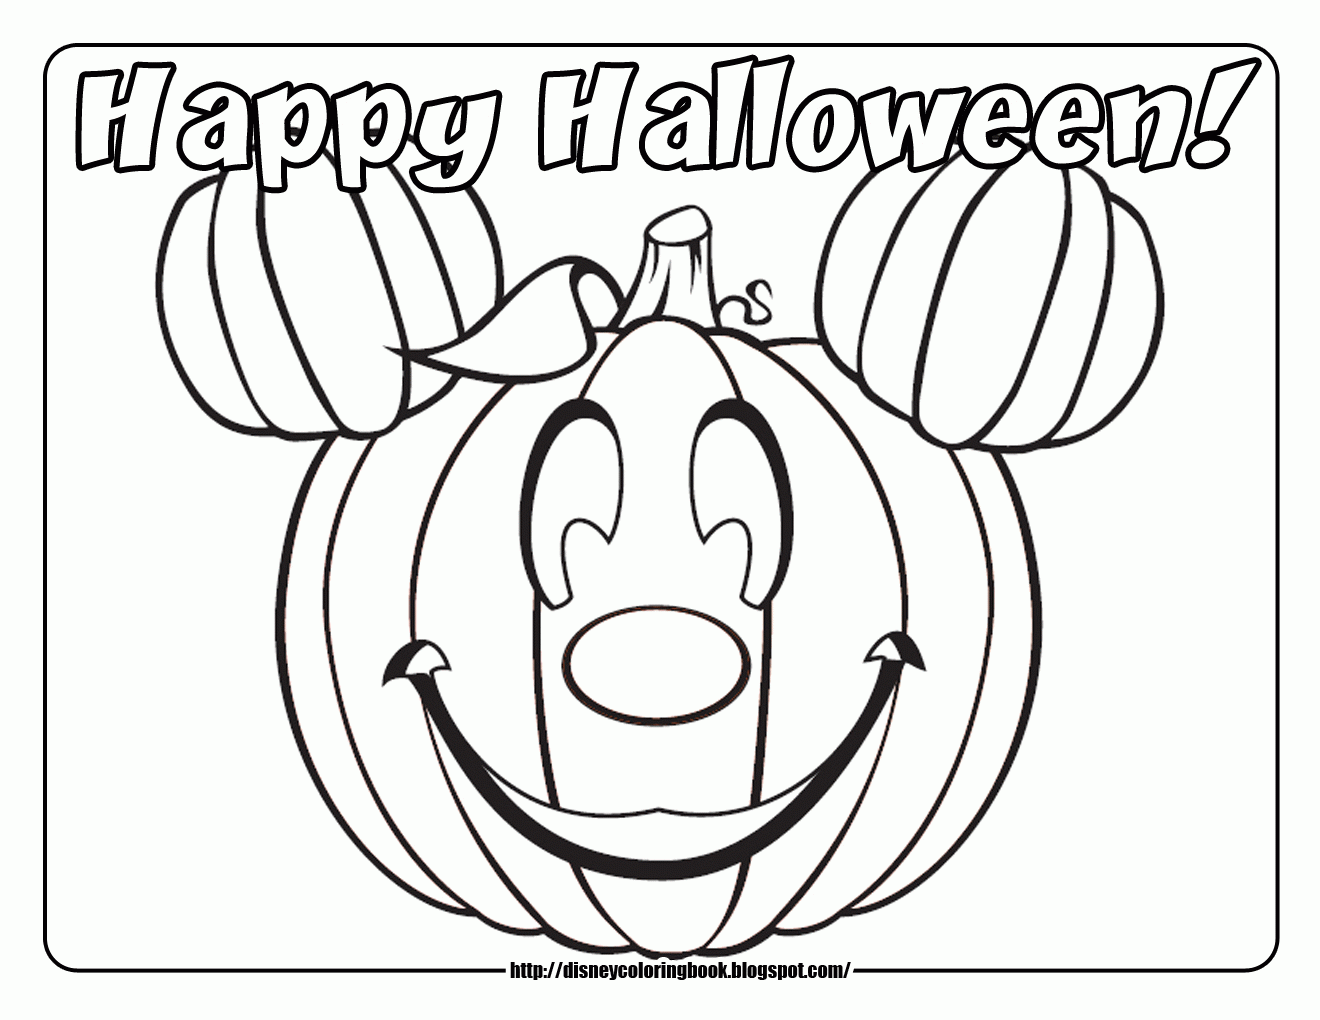 Happy Halloween Coloring Sheets | Coloring Online